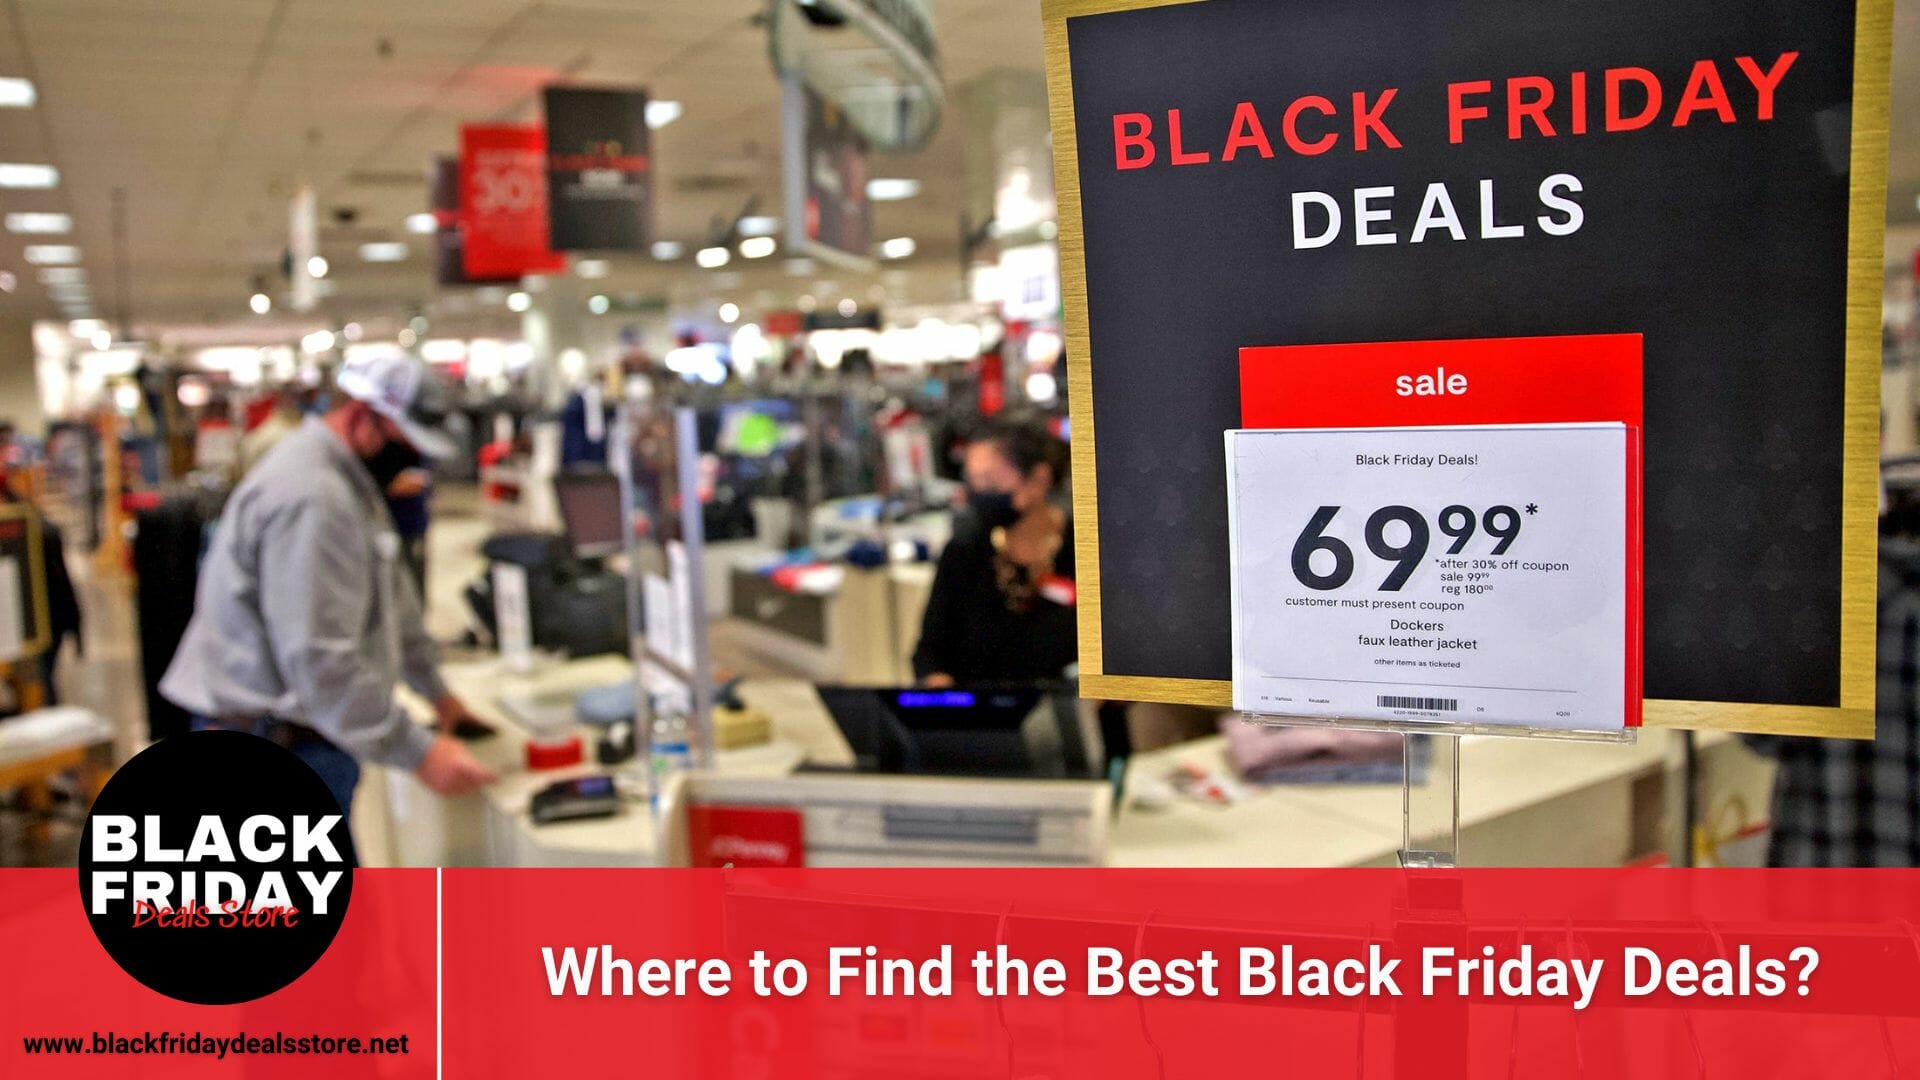 Where to Find the Best Black Friday Deals